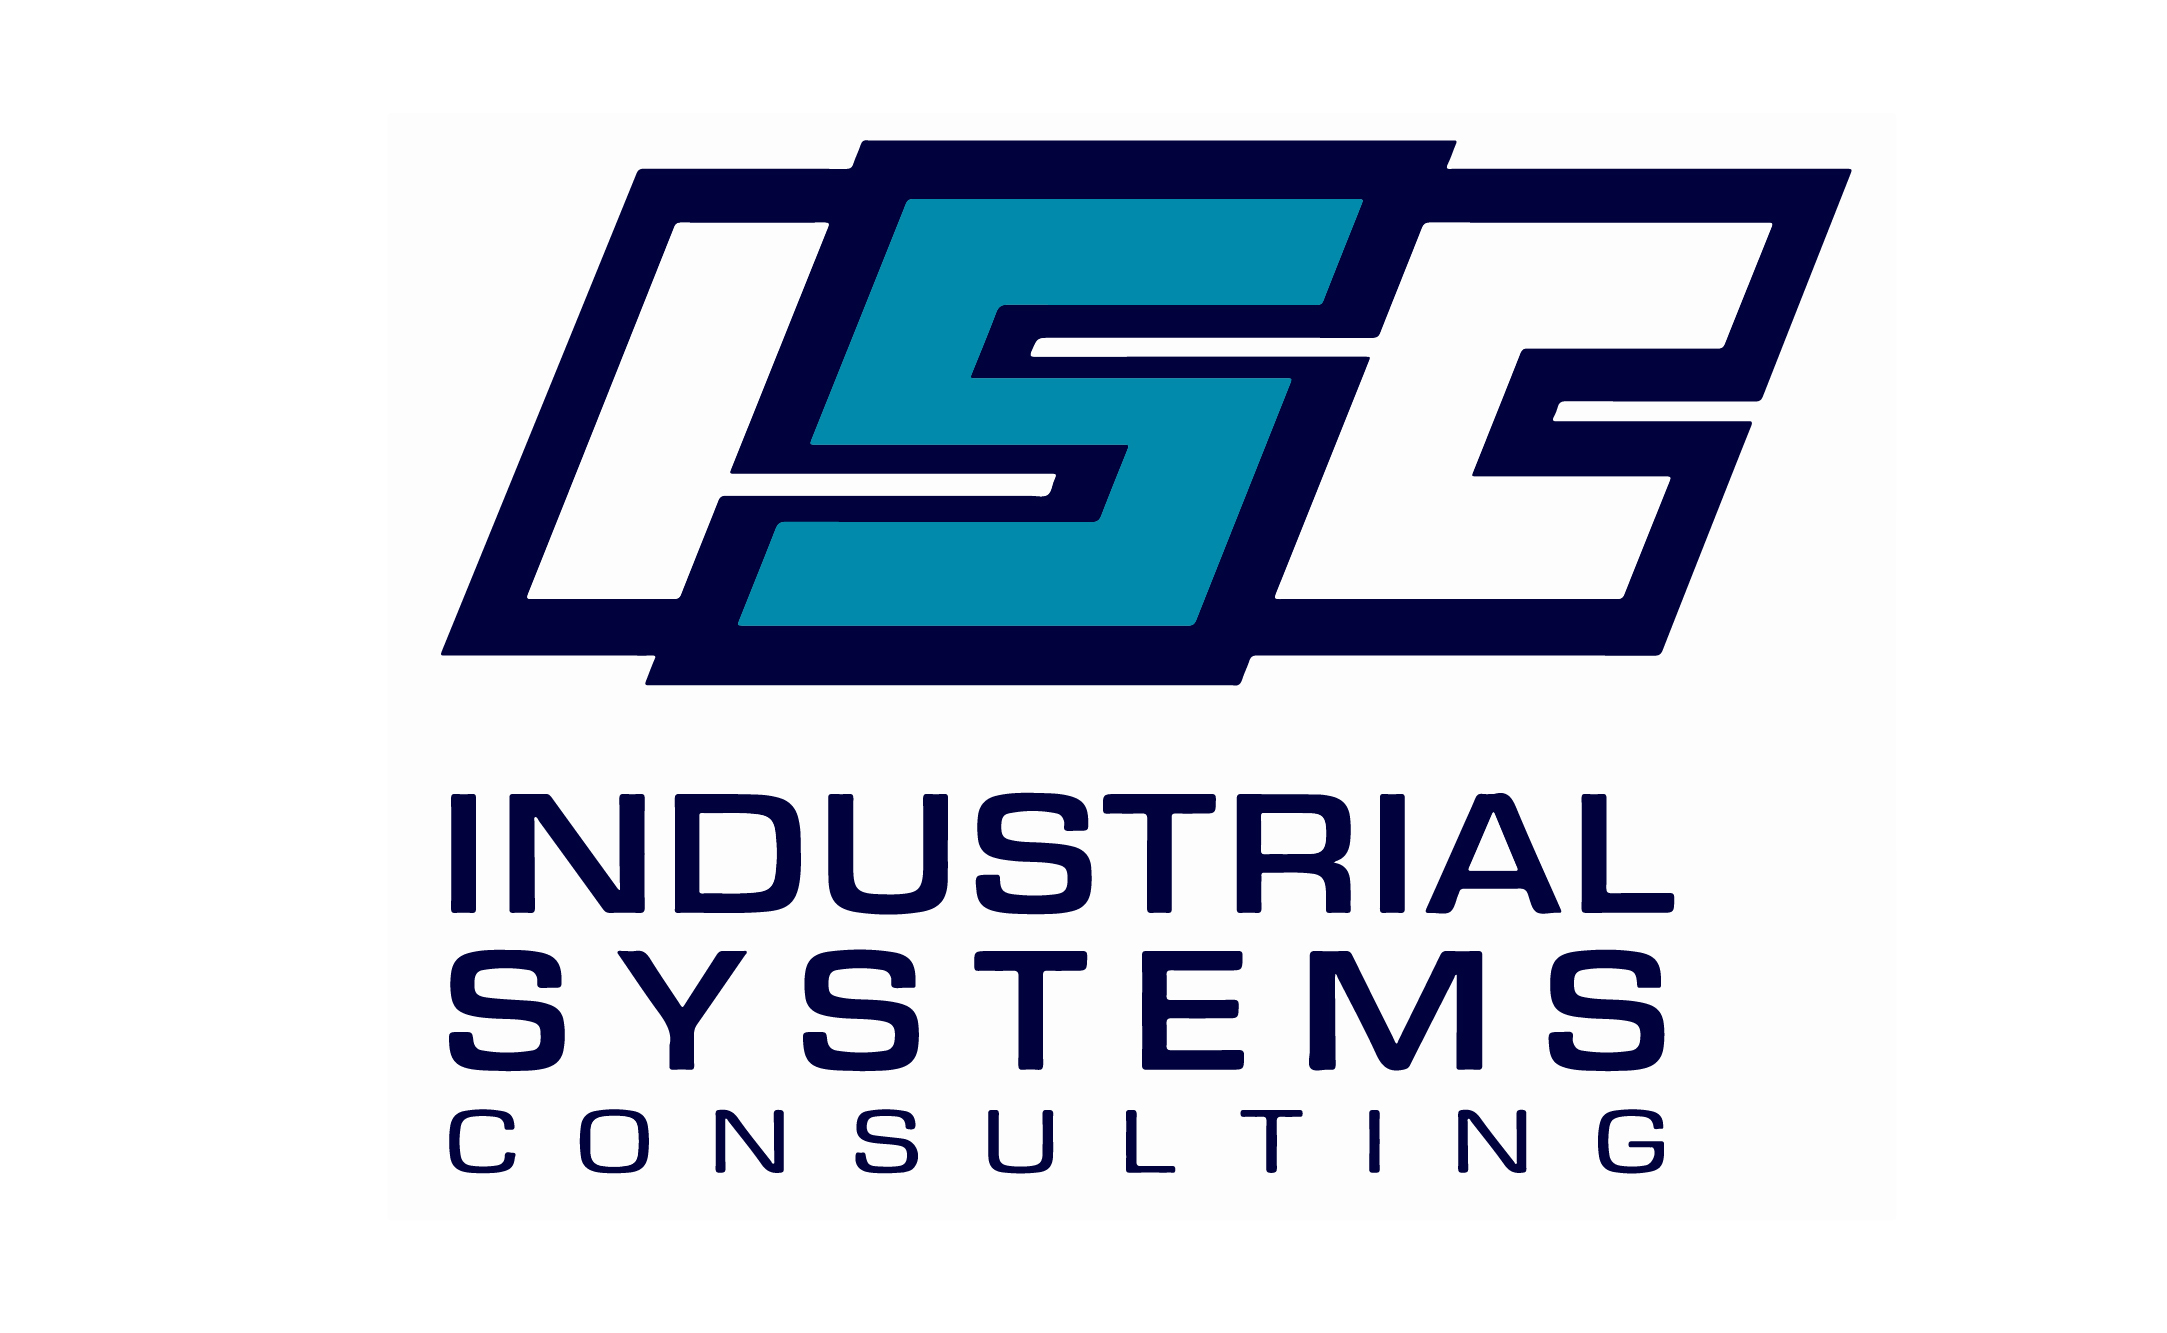 H. Industrial Systems Consulting (Tier 2)